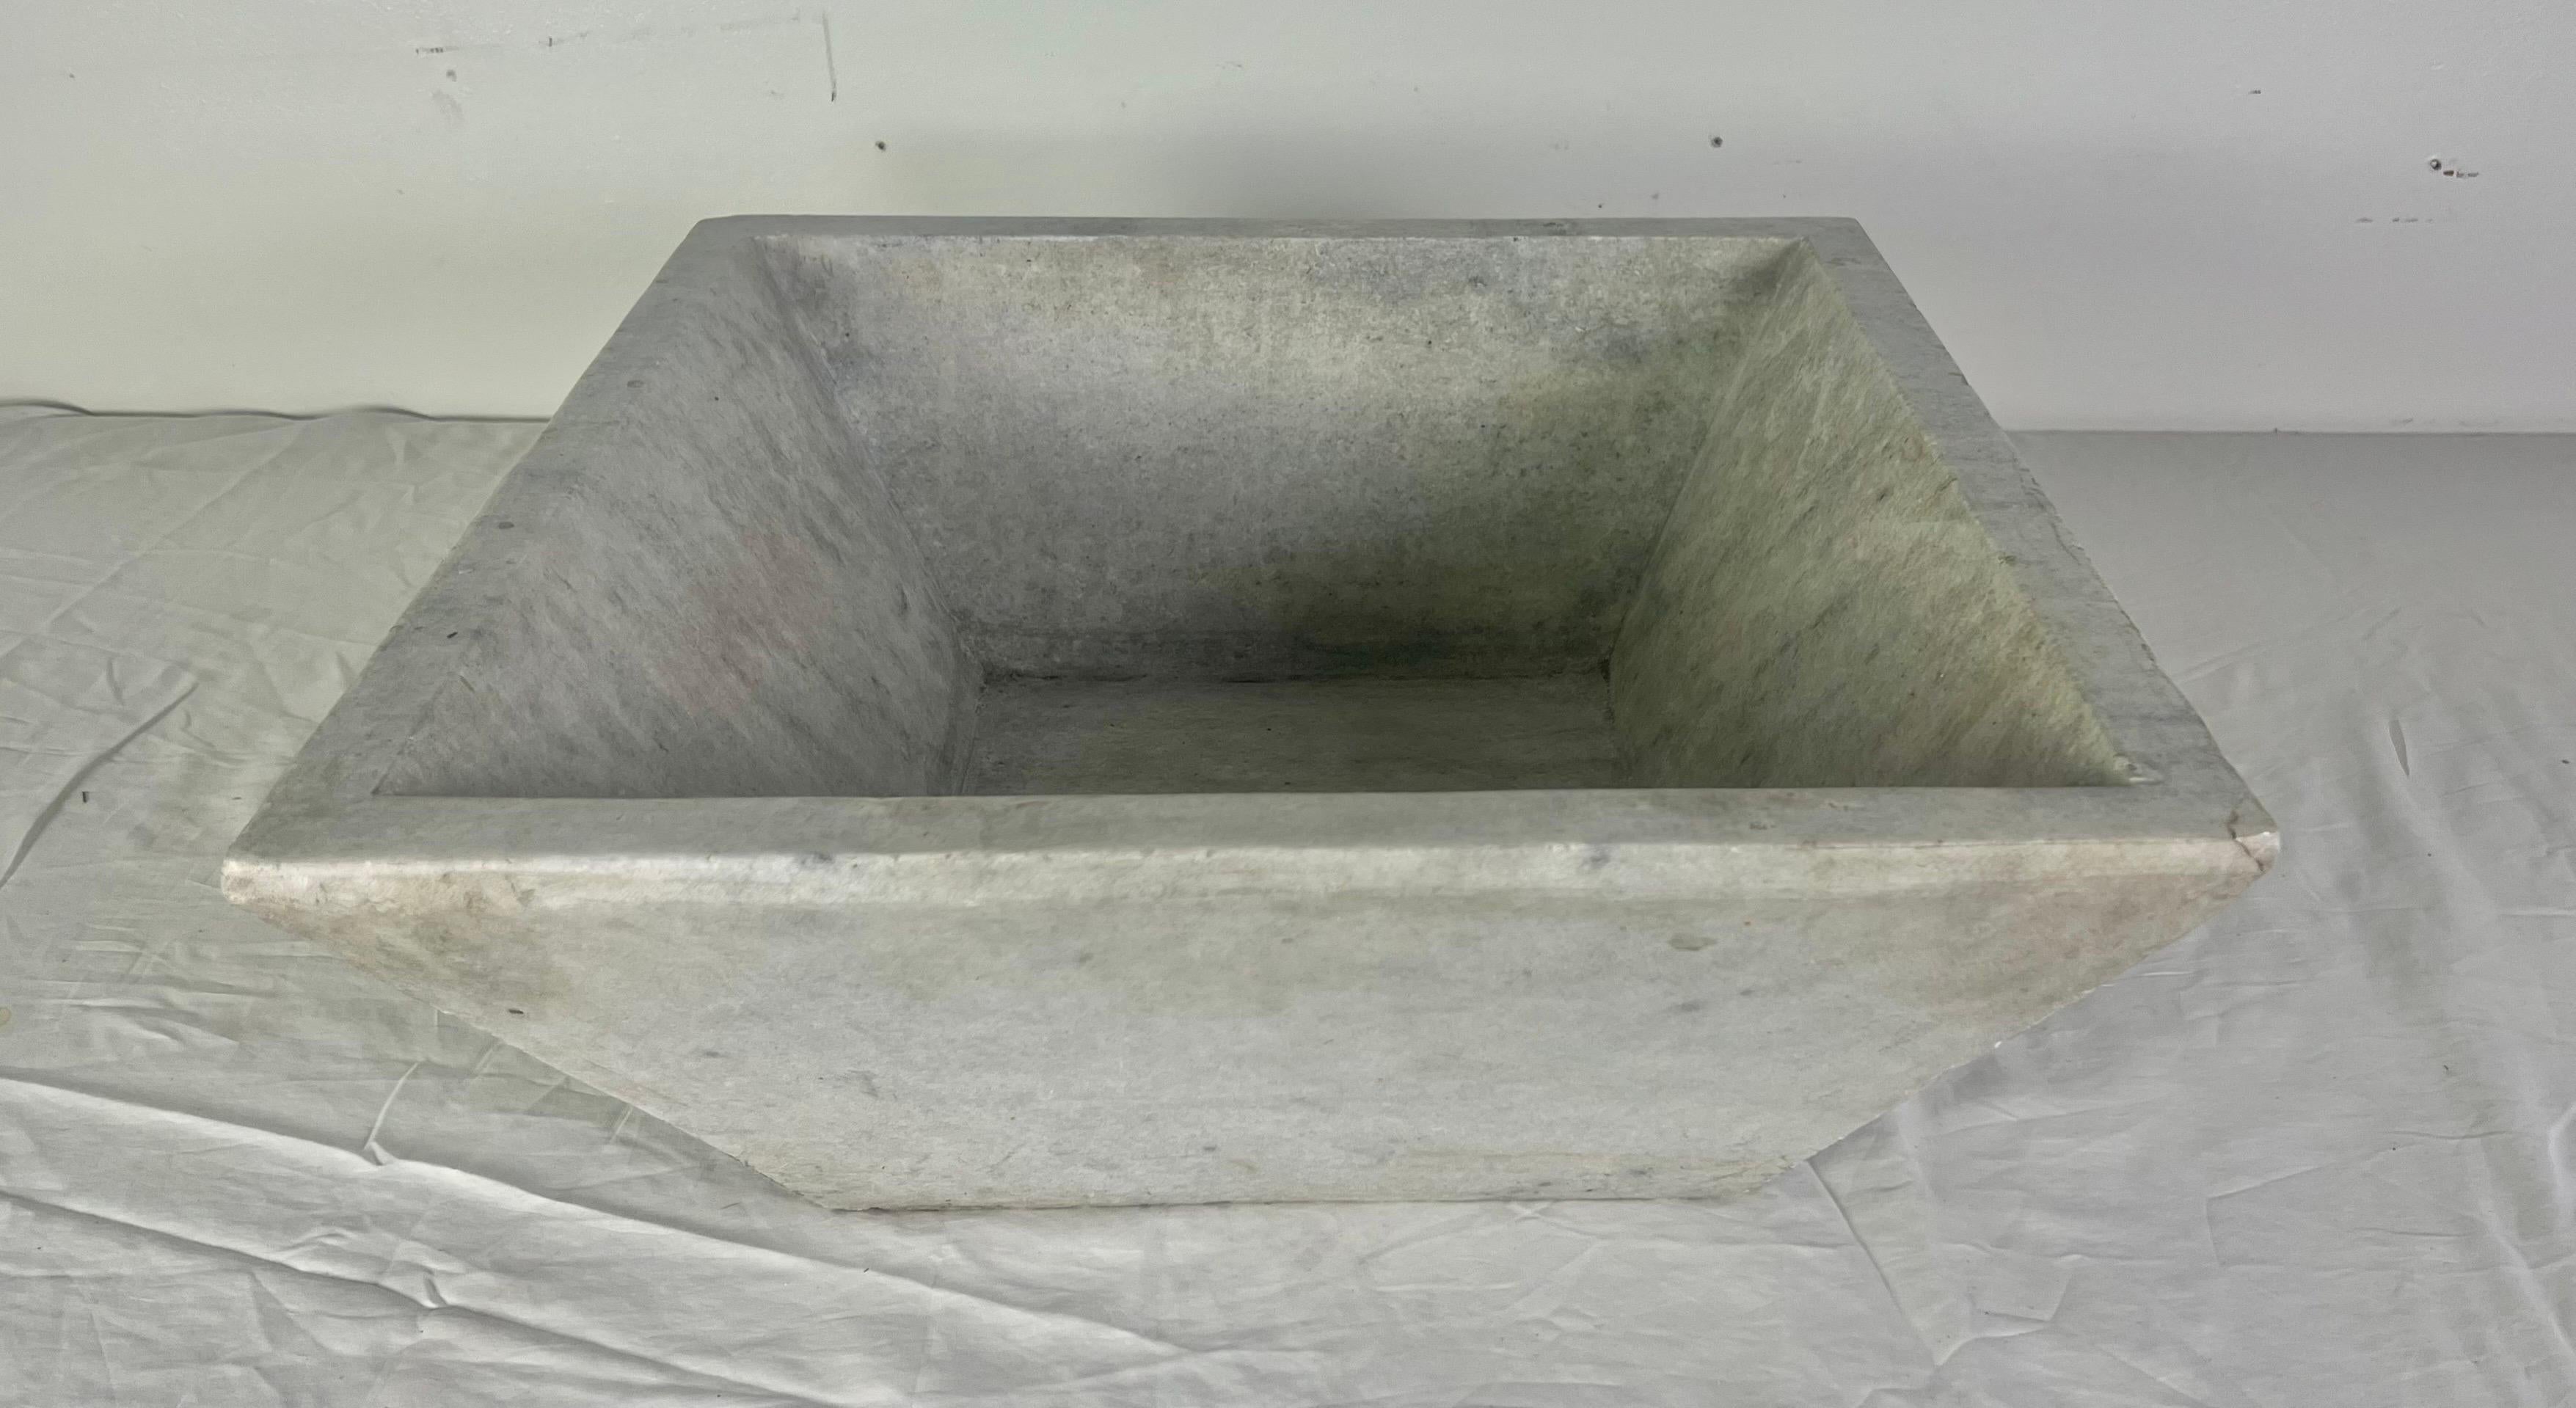 Mid 20th century square shaped solid stone Italian sink.  